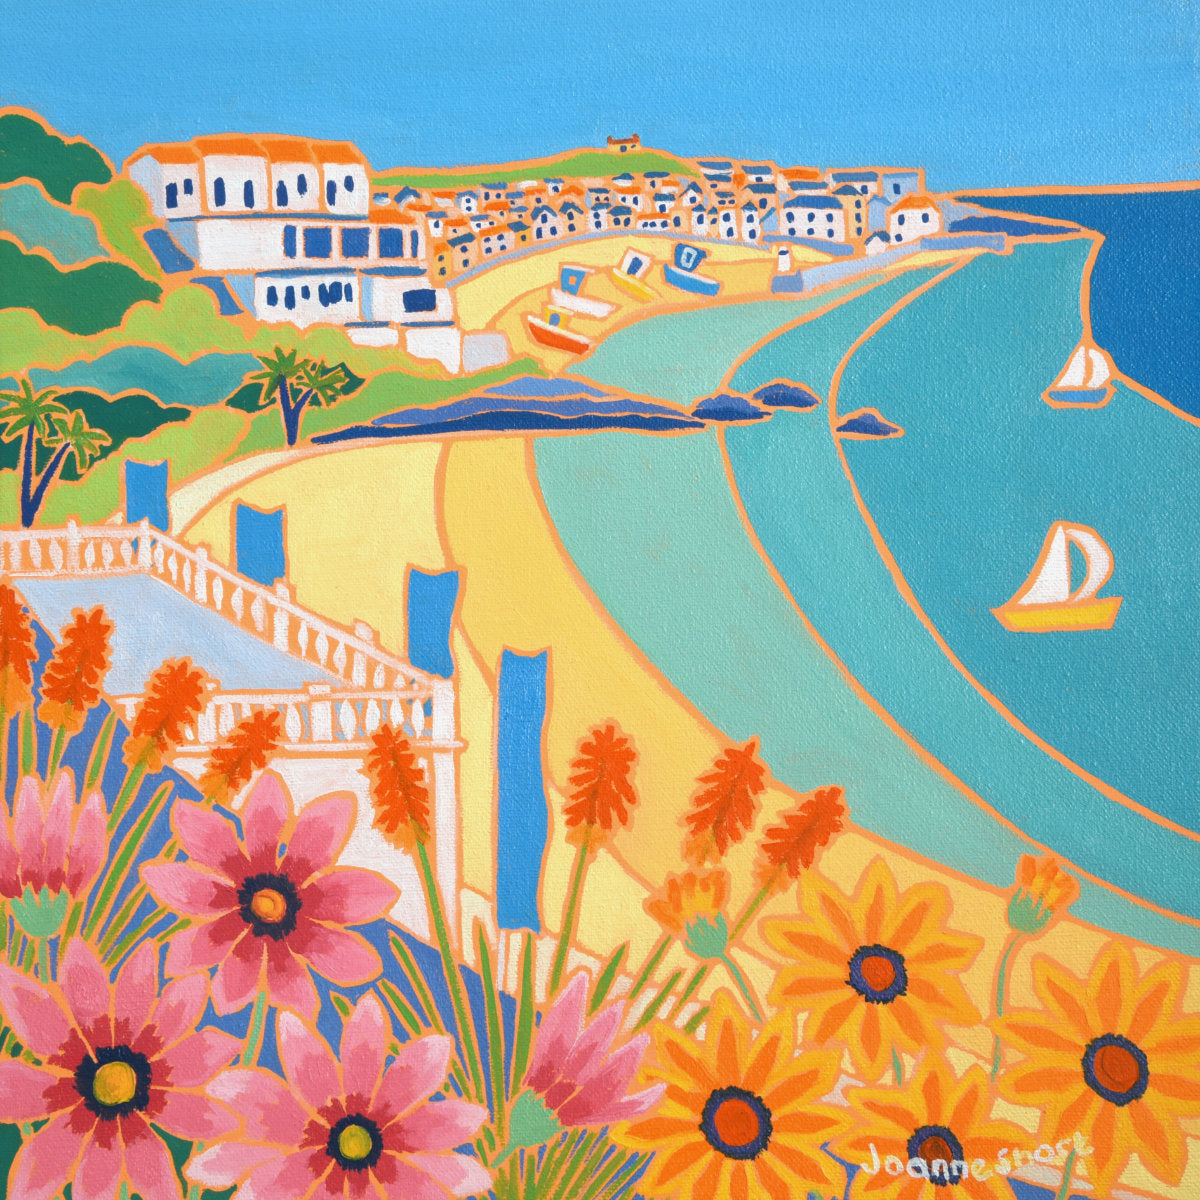 'Flowers and Flags Porthminster Beach St Ives', 12x12 inches oil on canvas. Painting by Cornish Artist Joanne Short. Cornish Art from our Cornwall Art Gallery